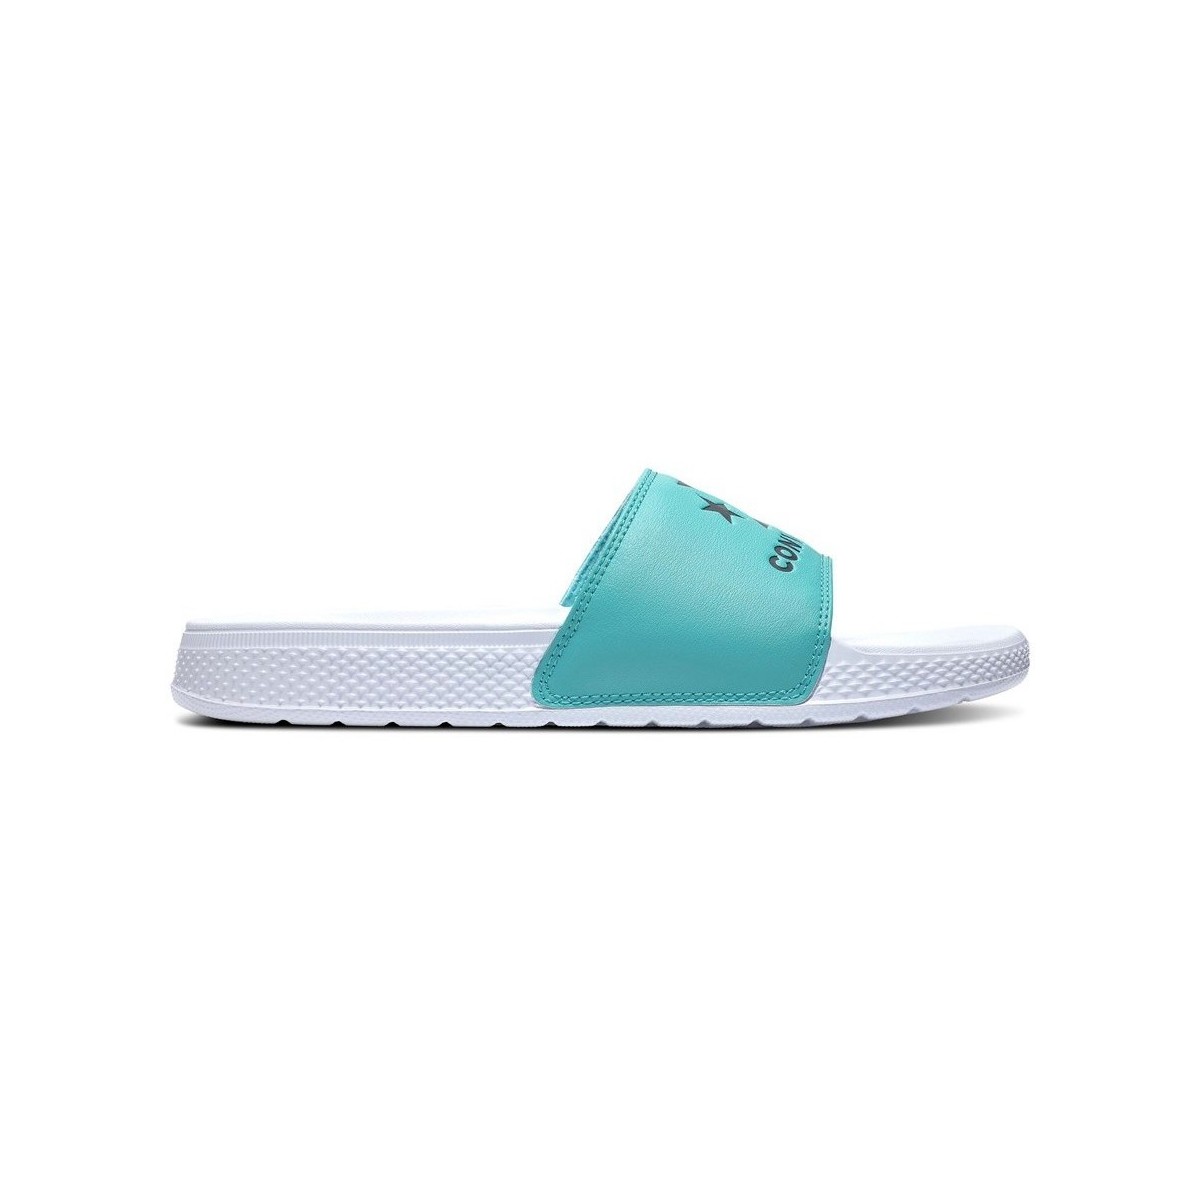 Chaussures Tongs Converse All Star Slide Seasonal Color Turquoise